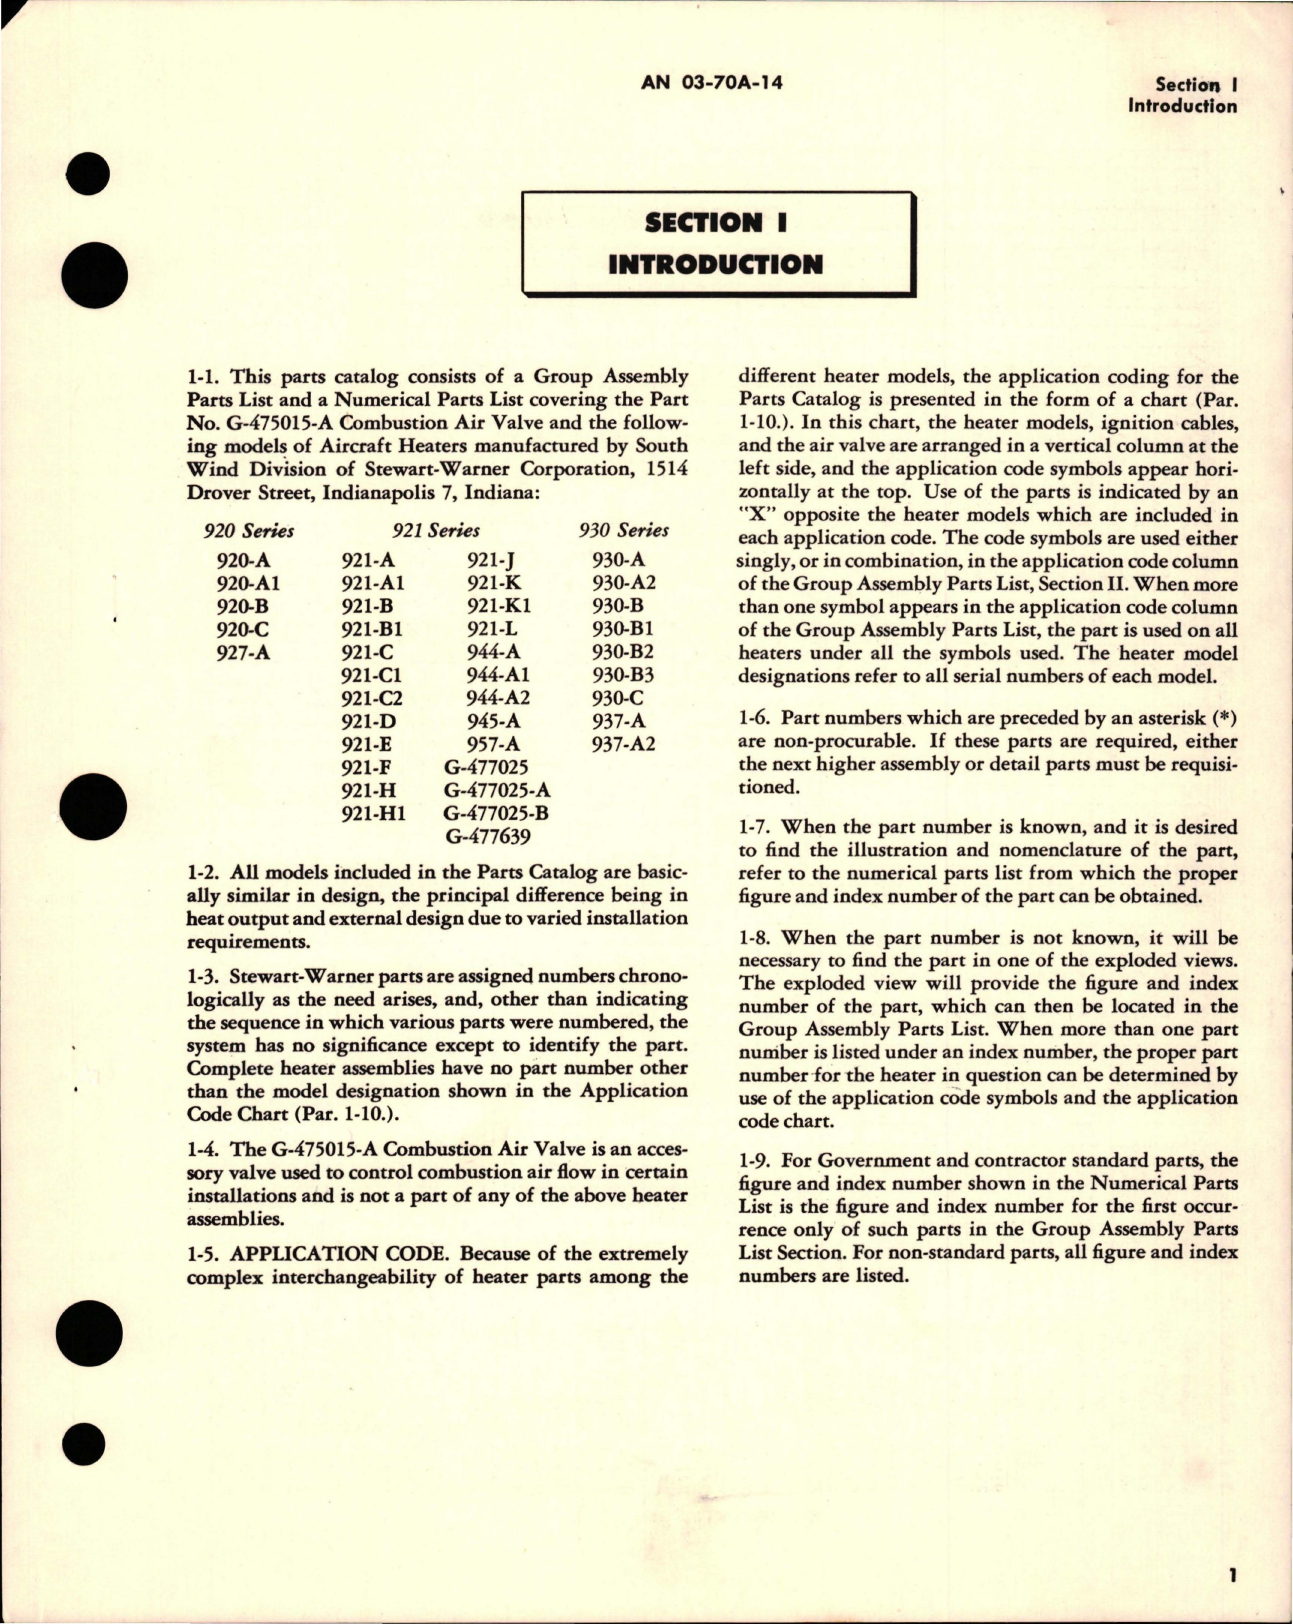 Sample page 5 from AirCorps Library document: Parts Catalog for Aircraft Heaters - Model 920, 921, and 930 Series